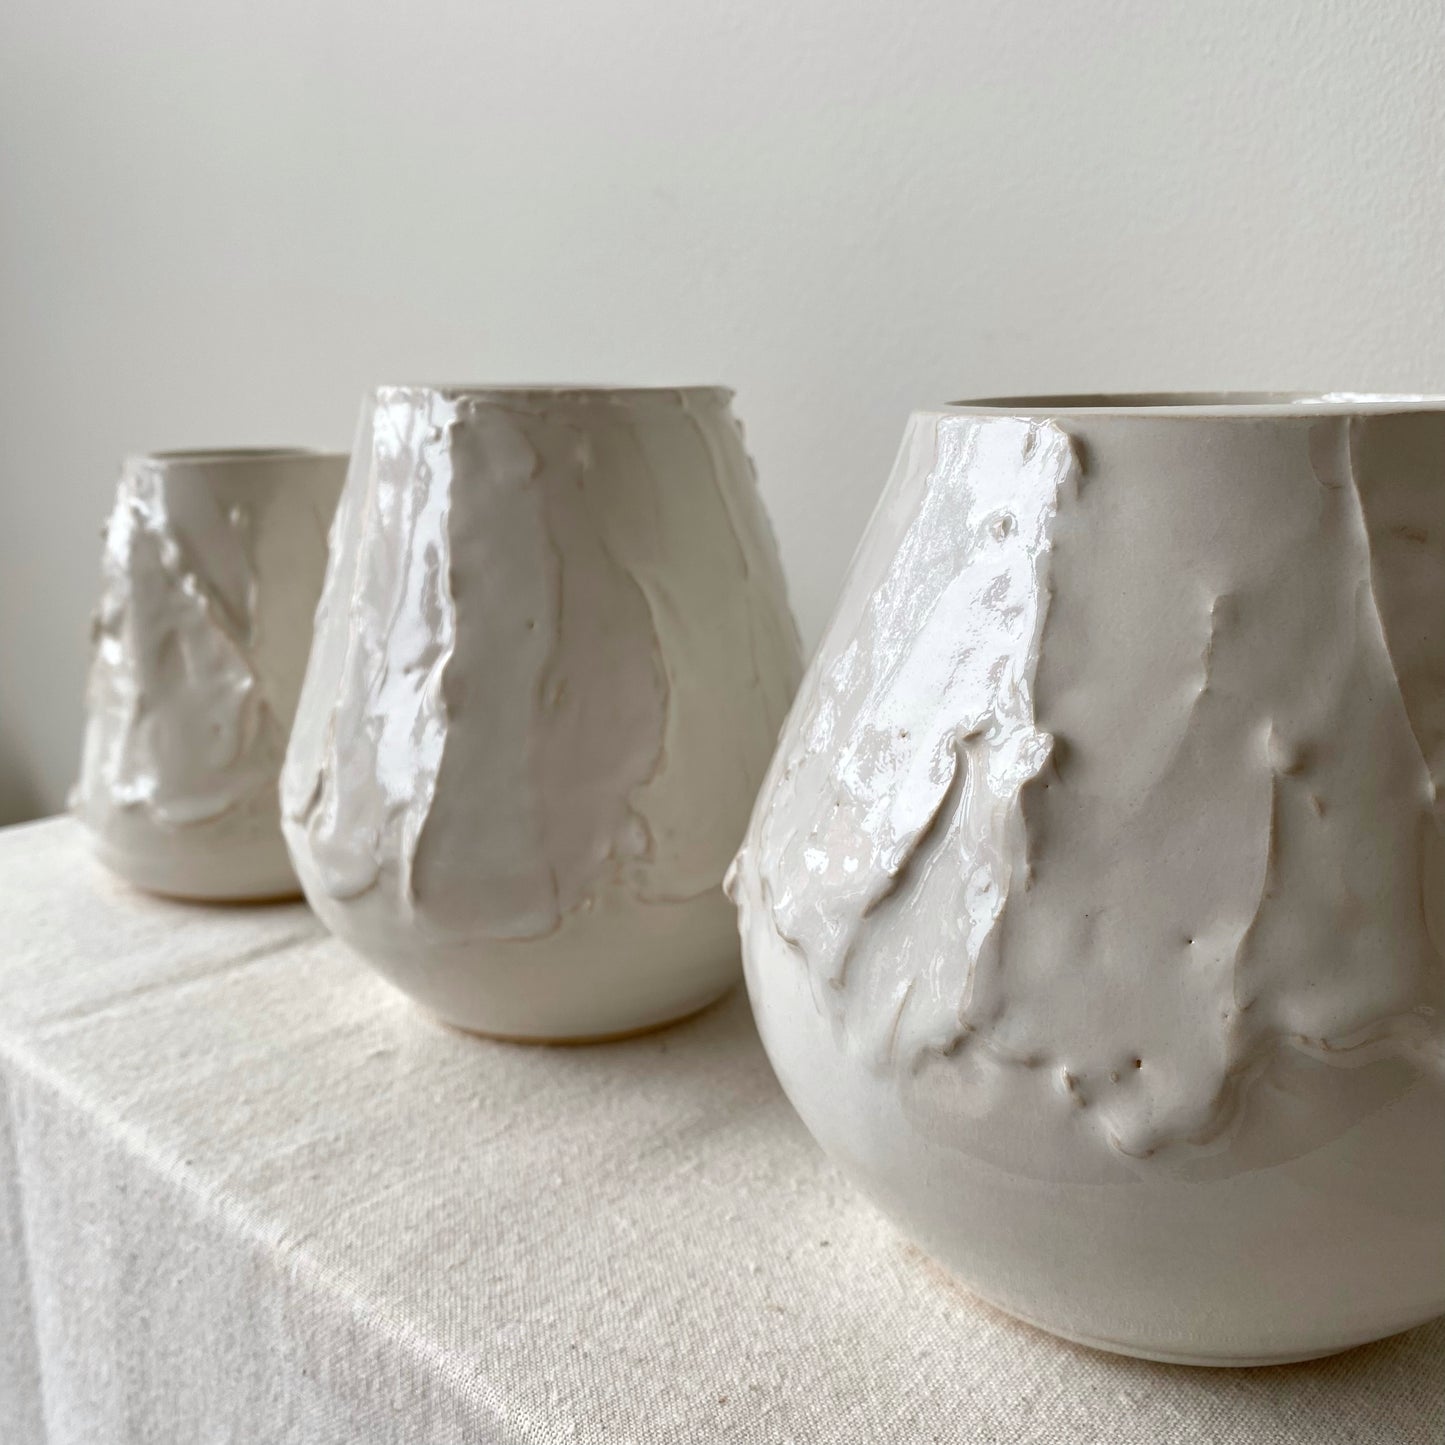 Pottery Vases by Catrin Magnusson, Choose